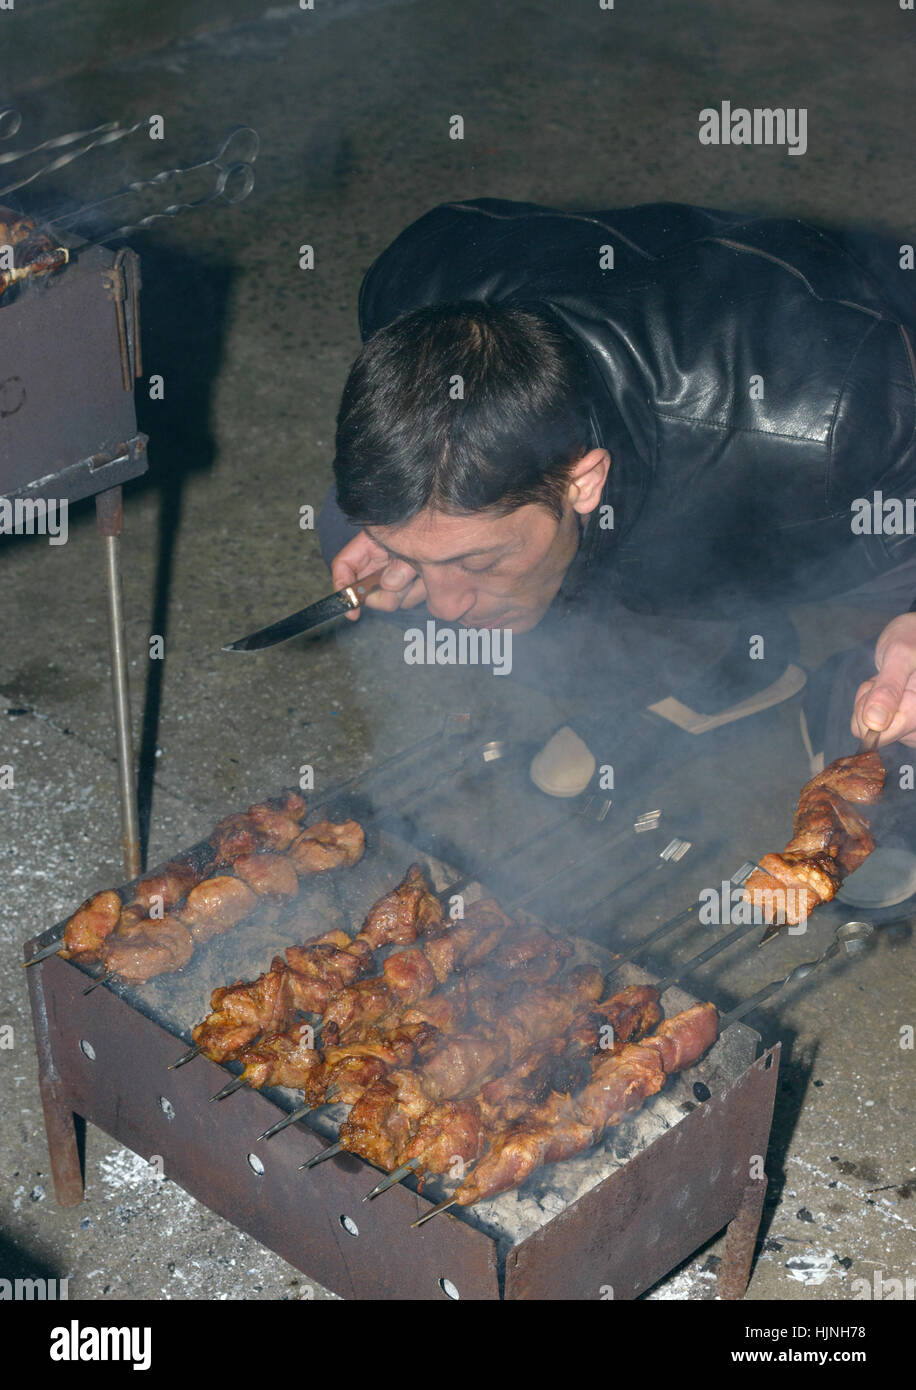 Mature man is cooking barbecued meat on compact metal mangal with skewers in evening. Stock Photo